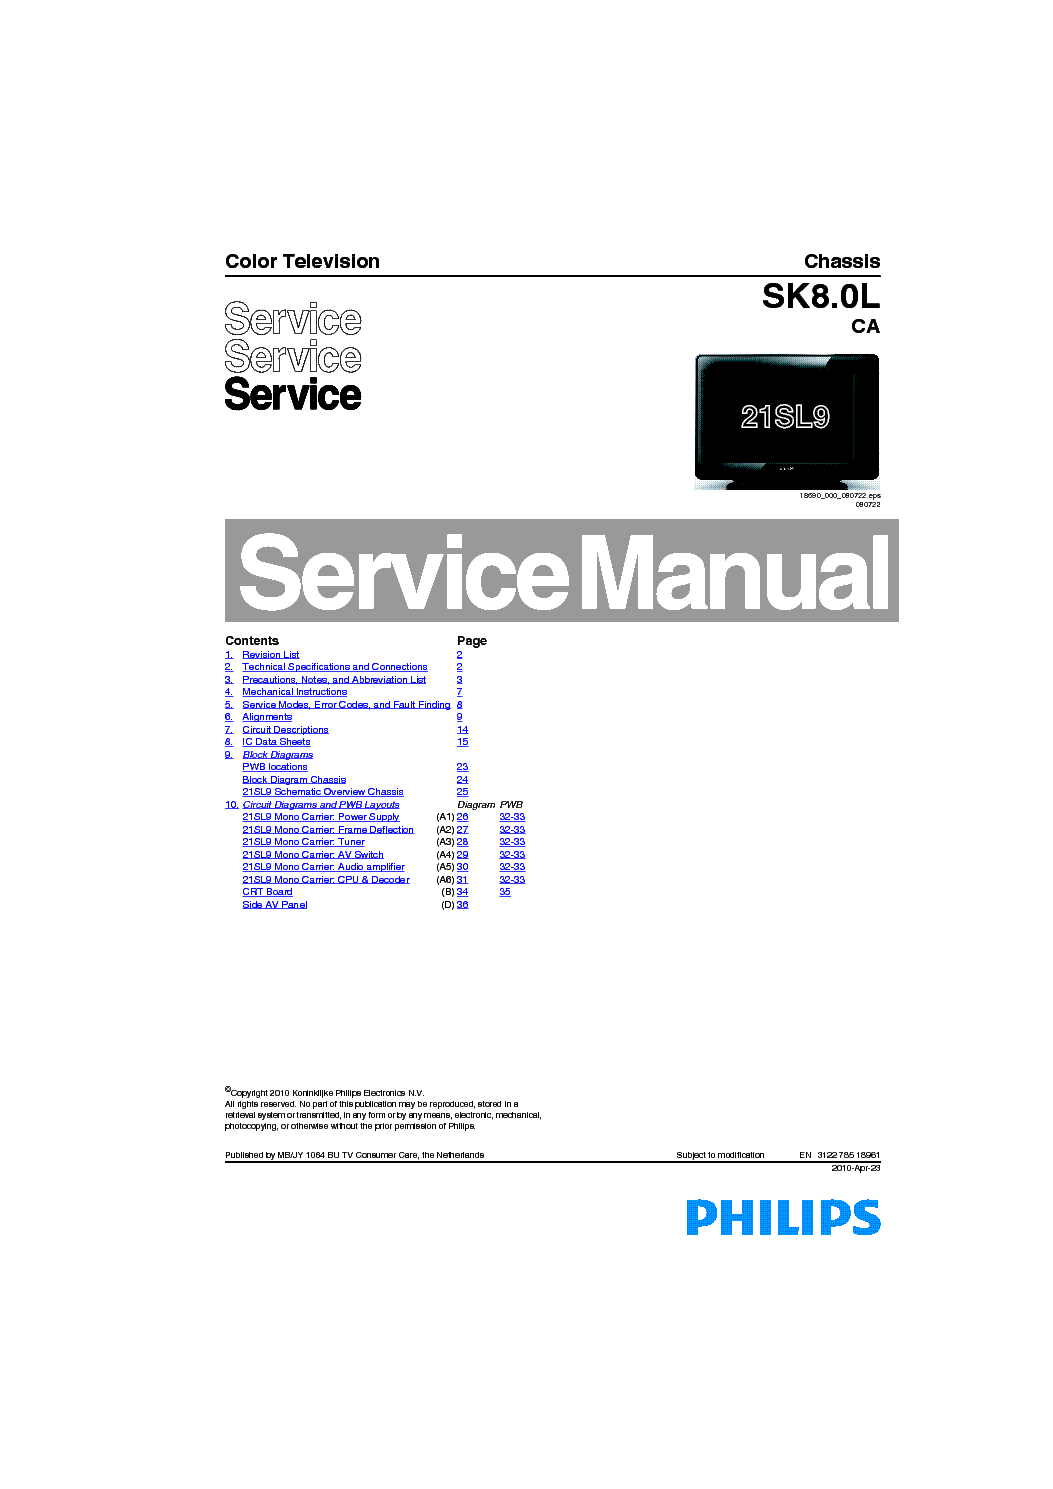 PHILIPS SK8.0L CA CHASSIS TV SM service manual (1st page)